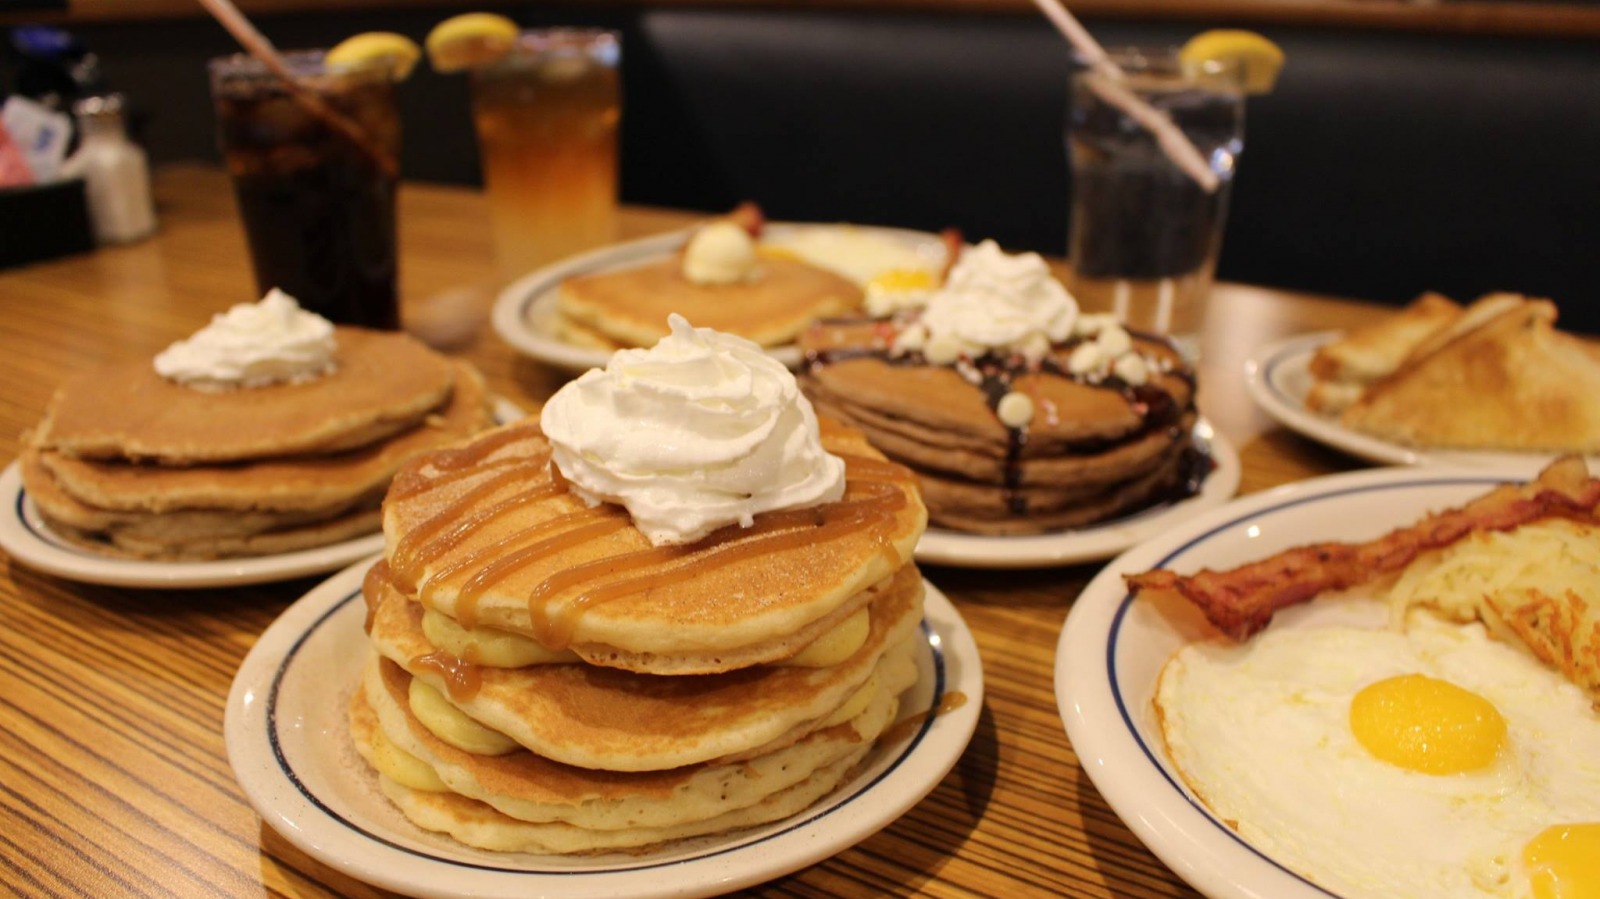 IHOP's Menu: The Healthiest and Unhealthiest Items